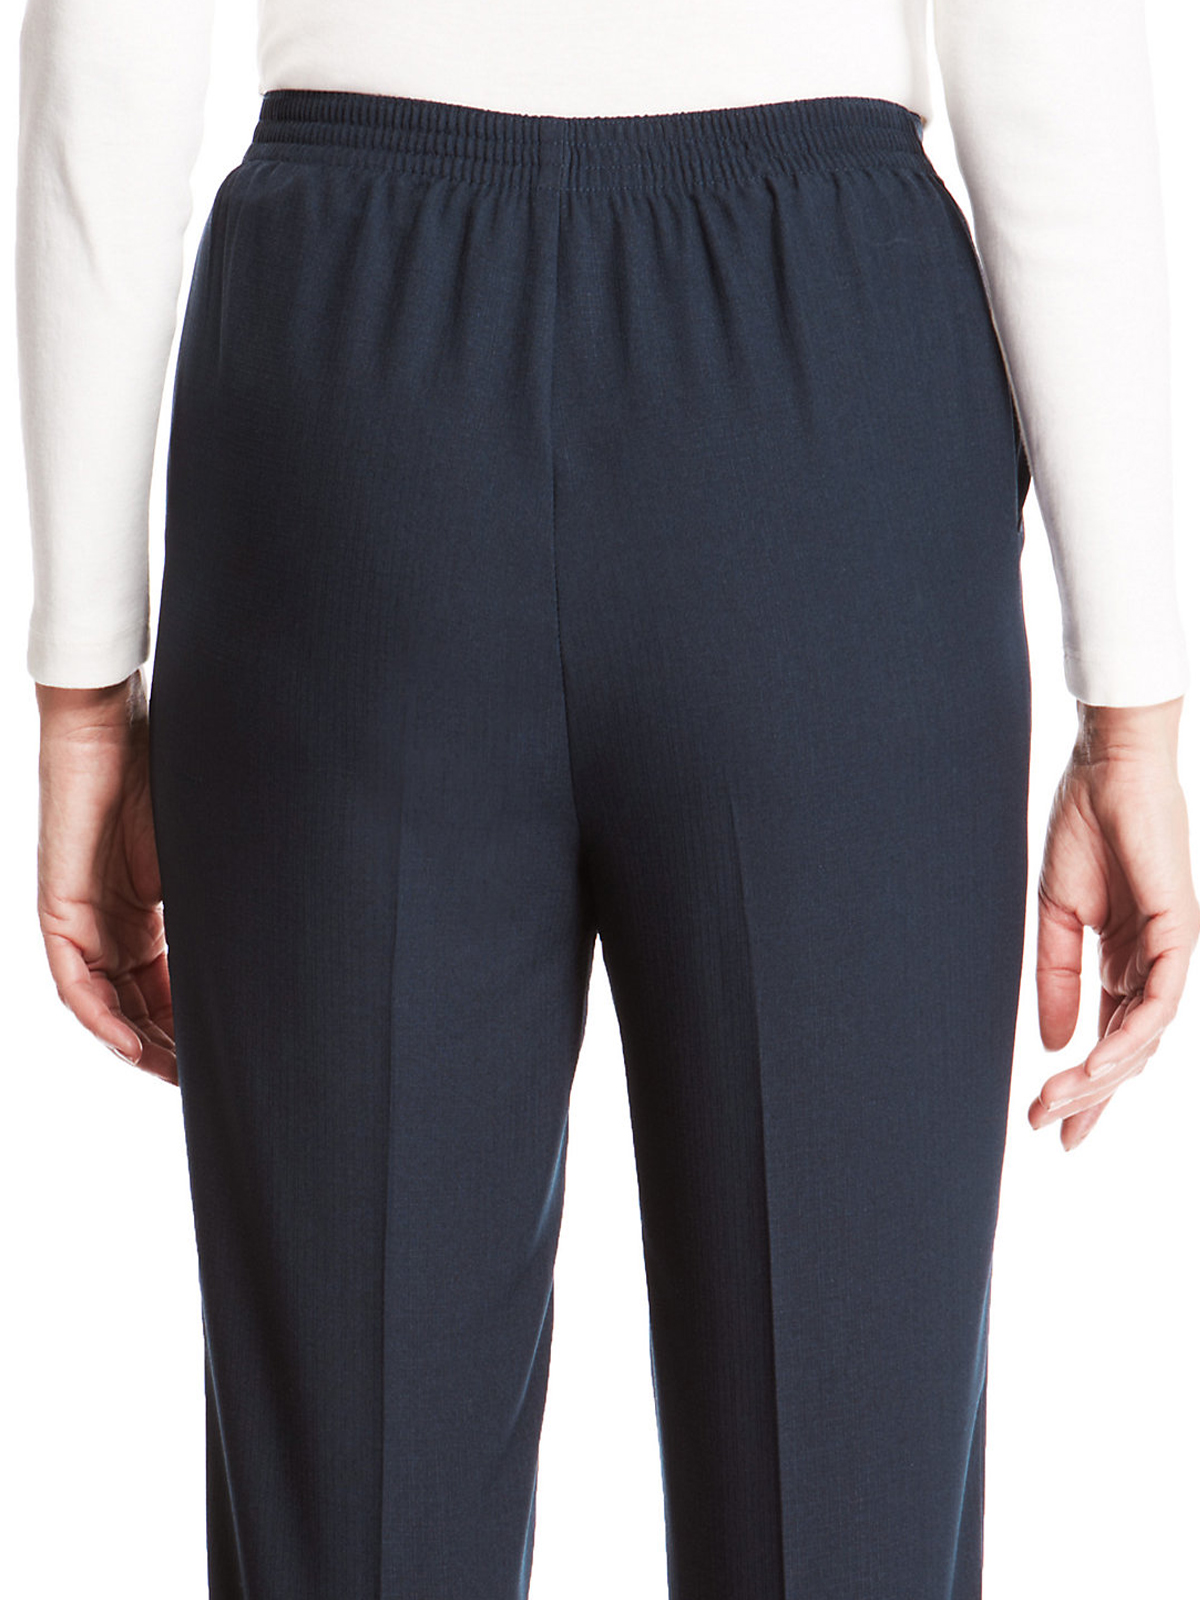 Marks and Spencer - - M&5 NAVY Pull On Trousers - Size 8 to 24